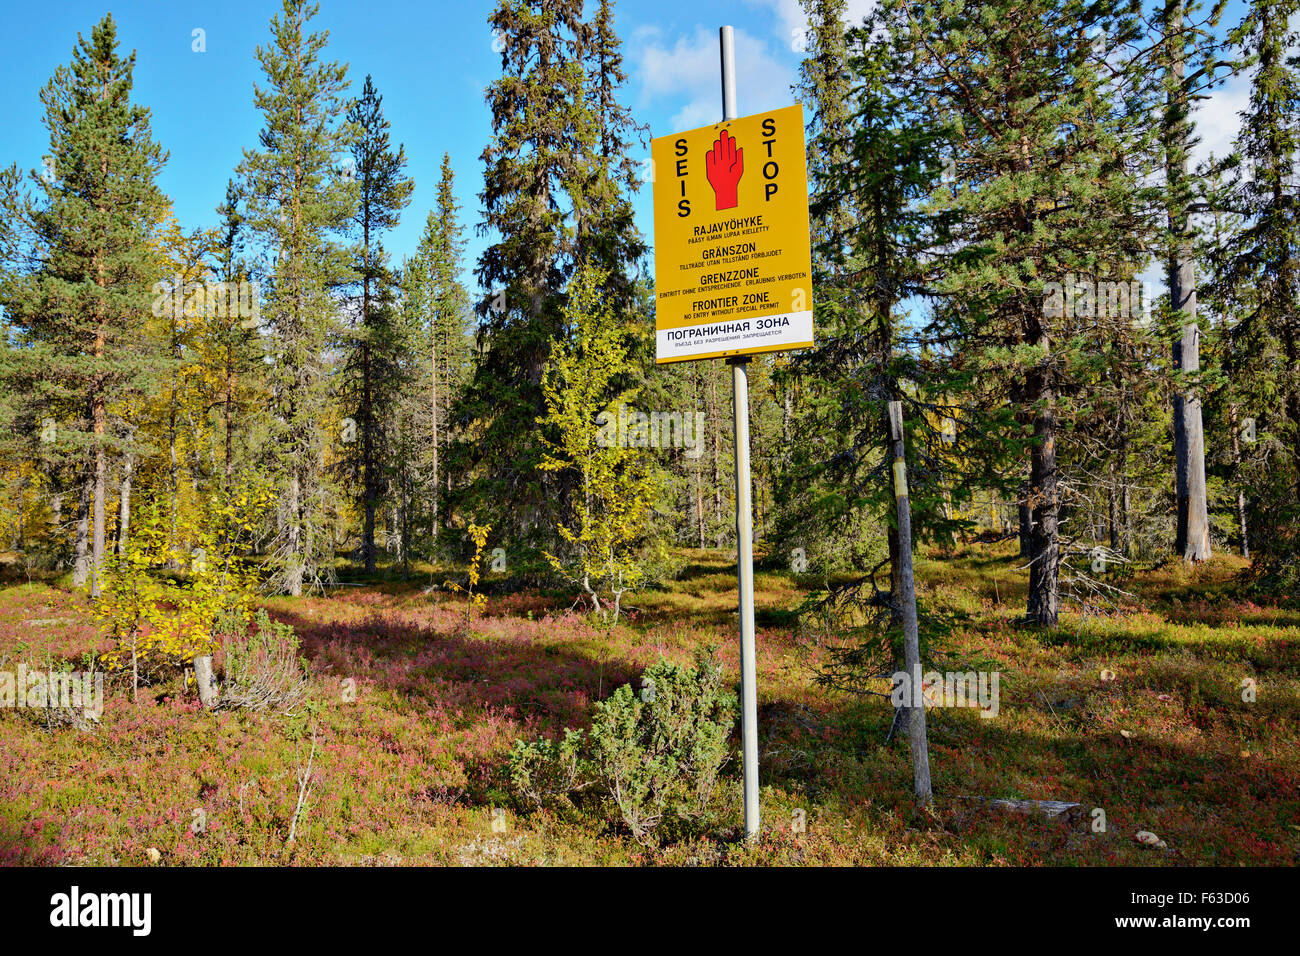 Autumn colors in early September. Restricted zone on Russian border. Urho Kekkonen National Park, Lapland, Finland. Stock Photo